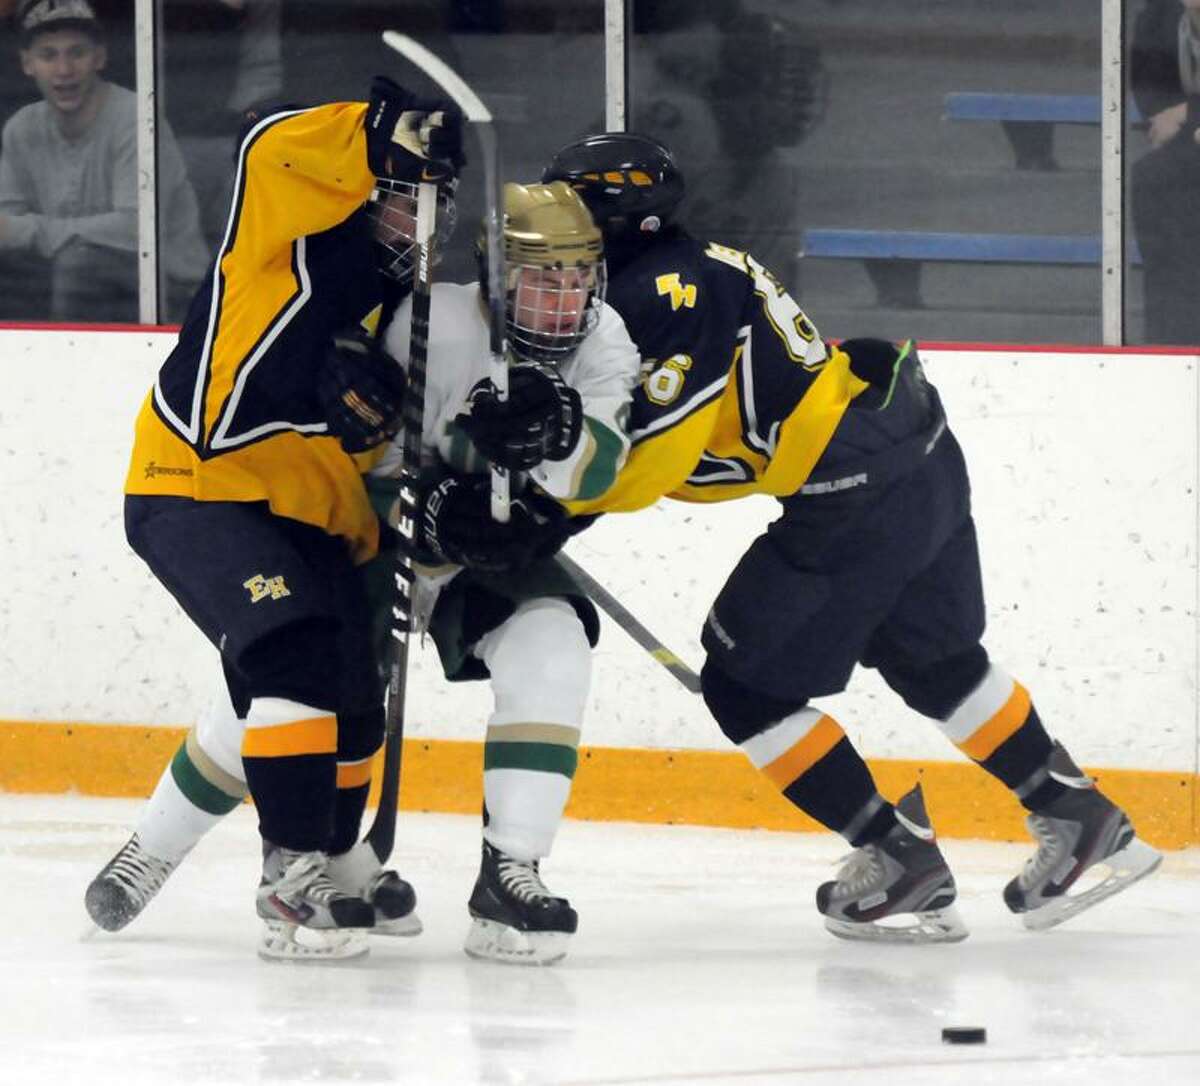 East Haven against Notre Dame of West Haven at Bennett Rink boys hockey. NotreDame-West Haven's Eric Austin squeezes between East Haven players. Photo by Mara Lavitt/New Haven Register